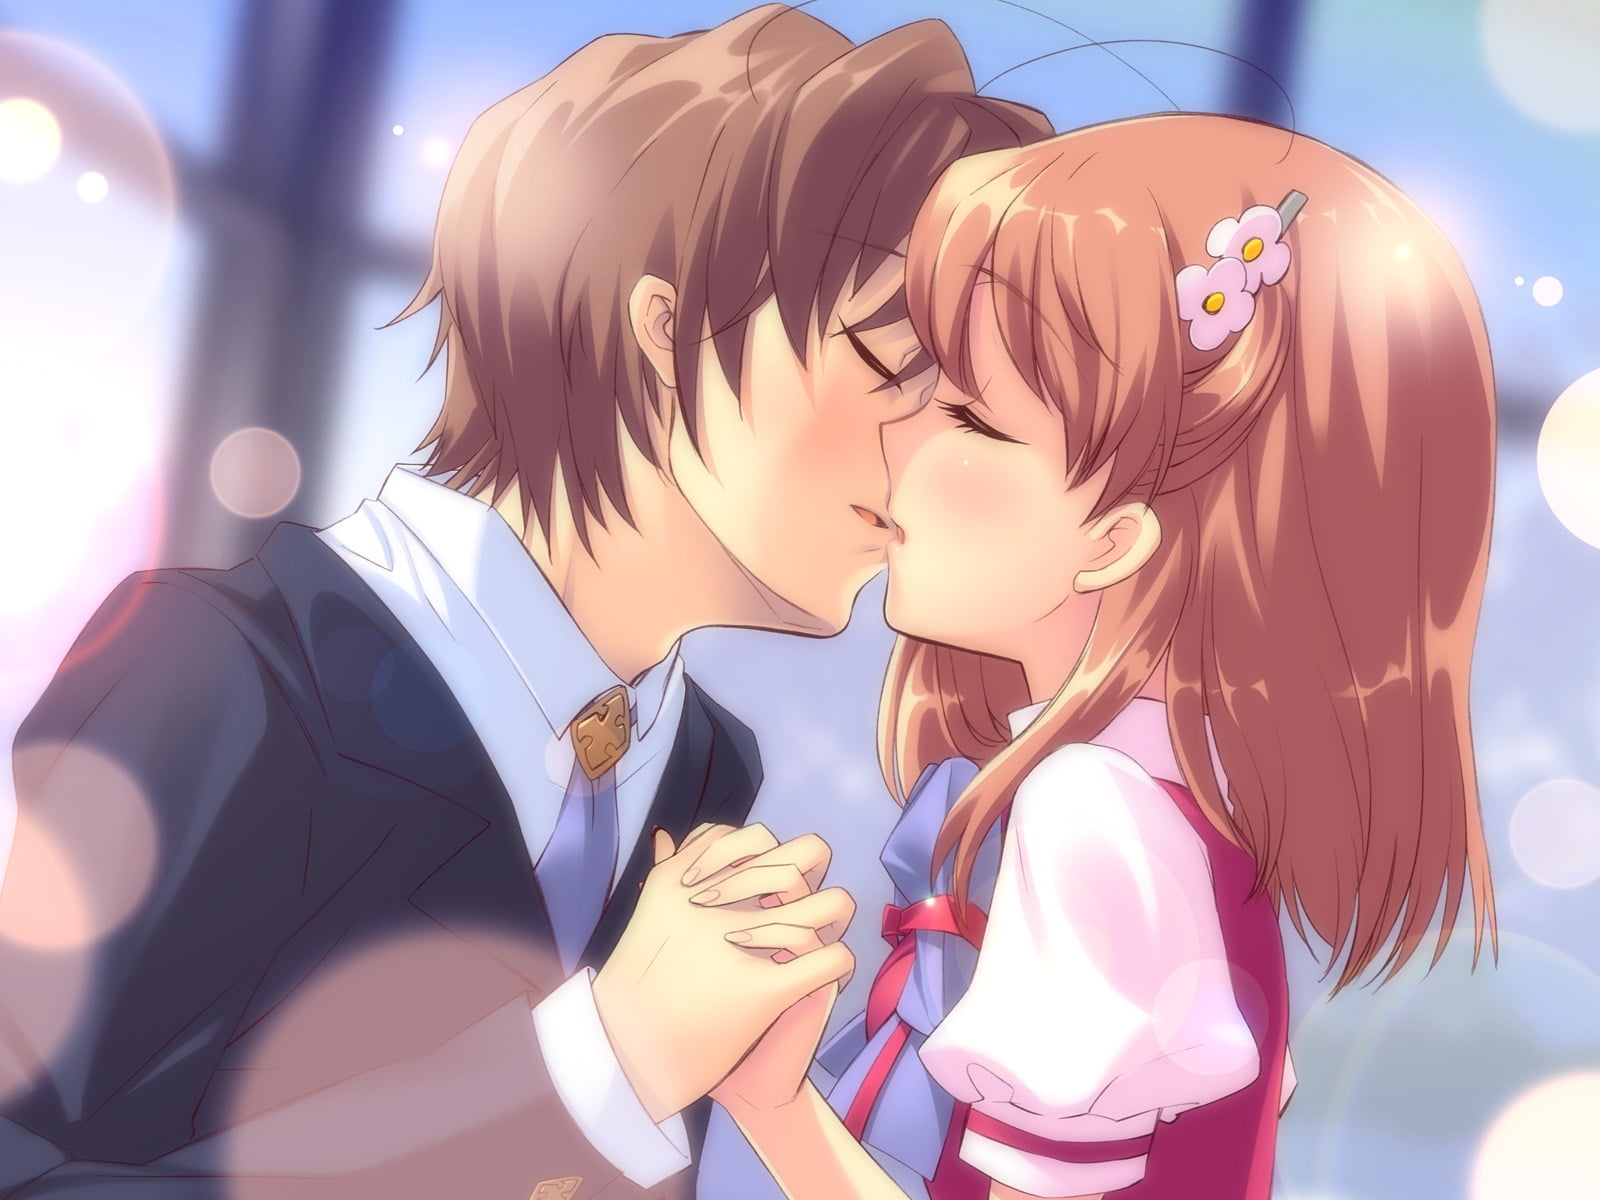 Male And Female Anime Character Kissing Each Other Hd Wallpaper